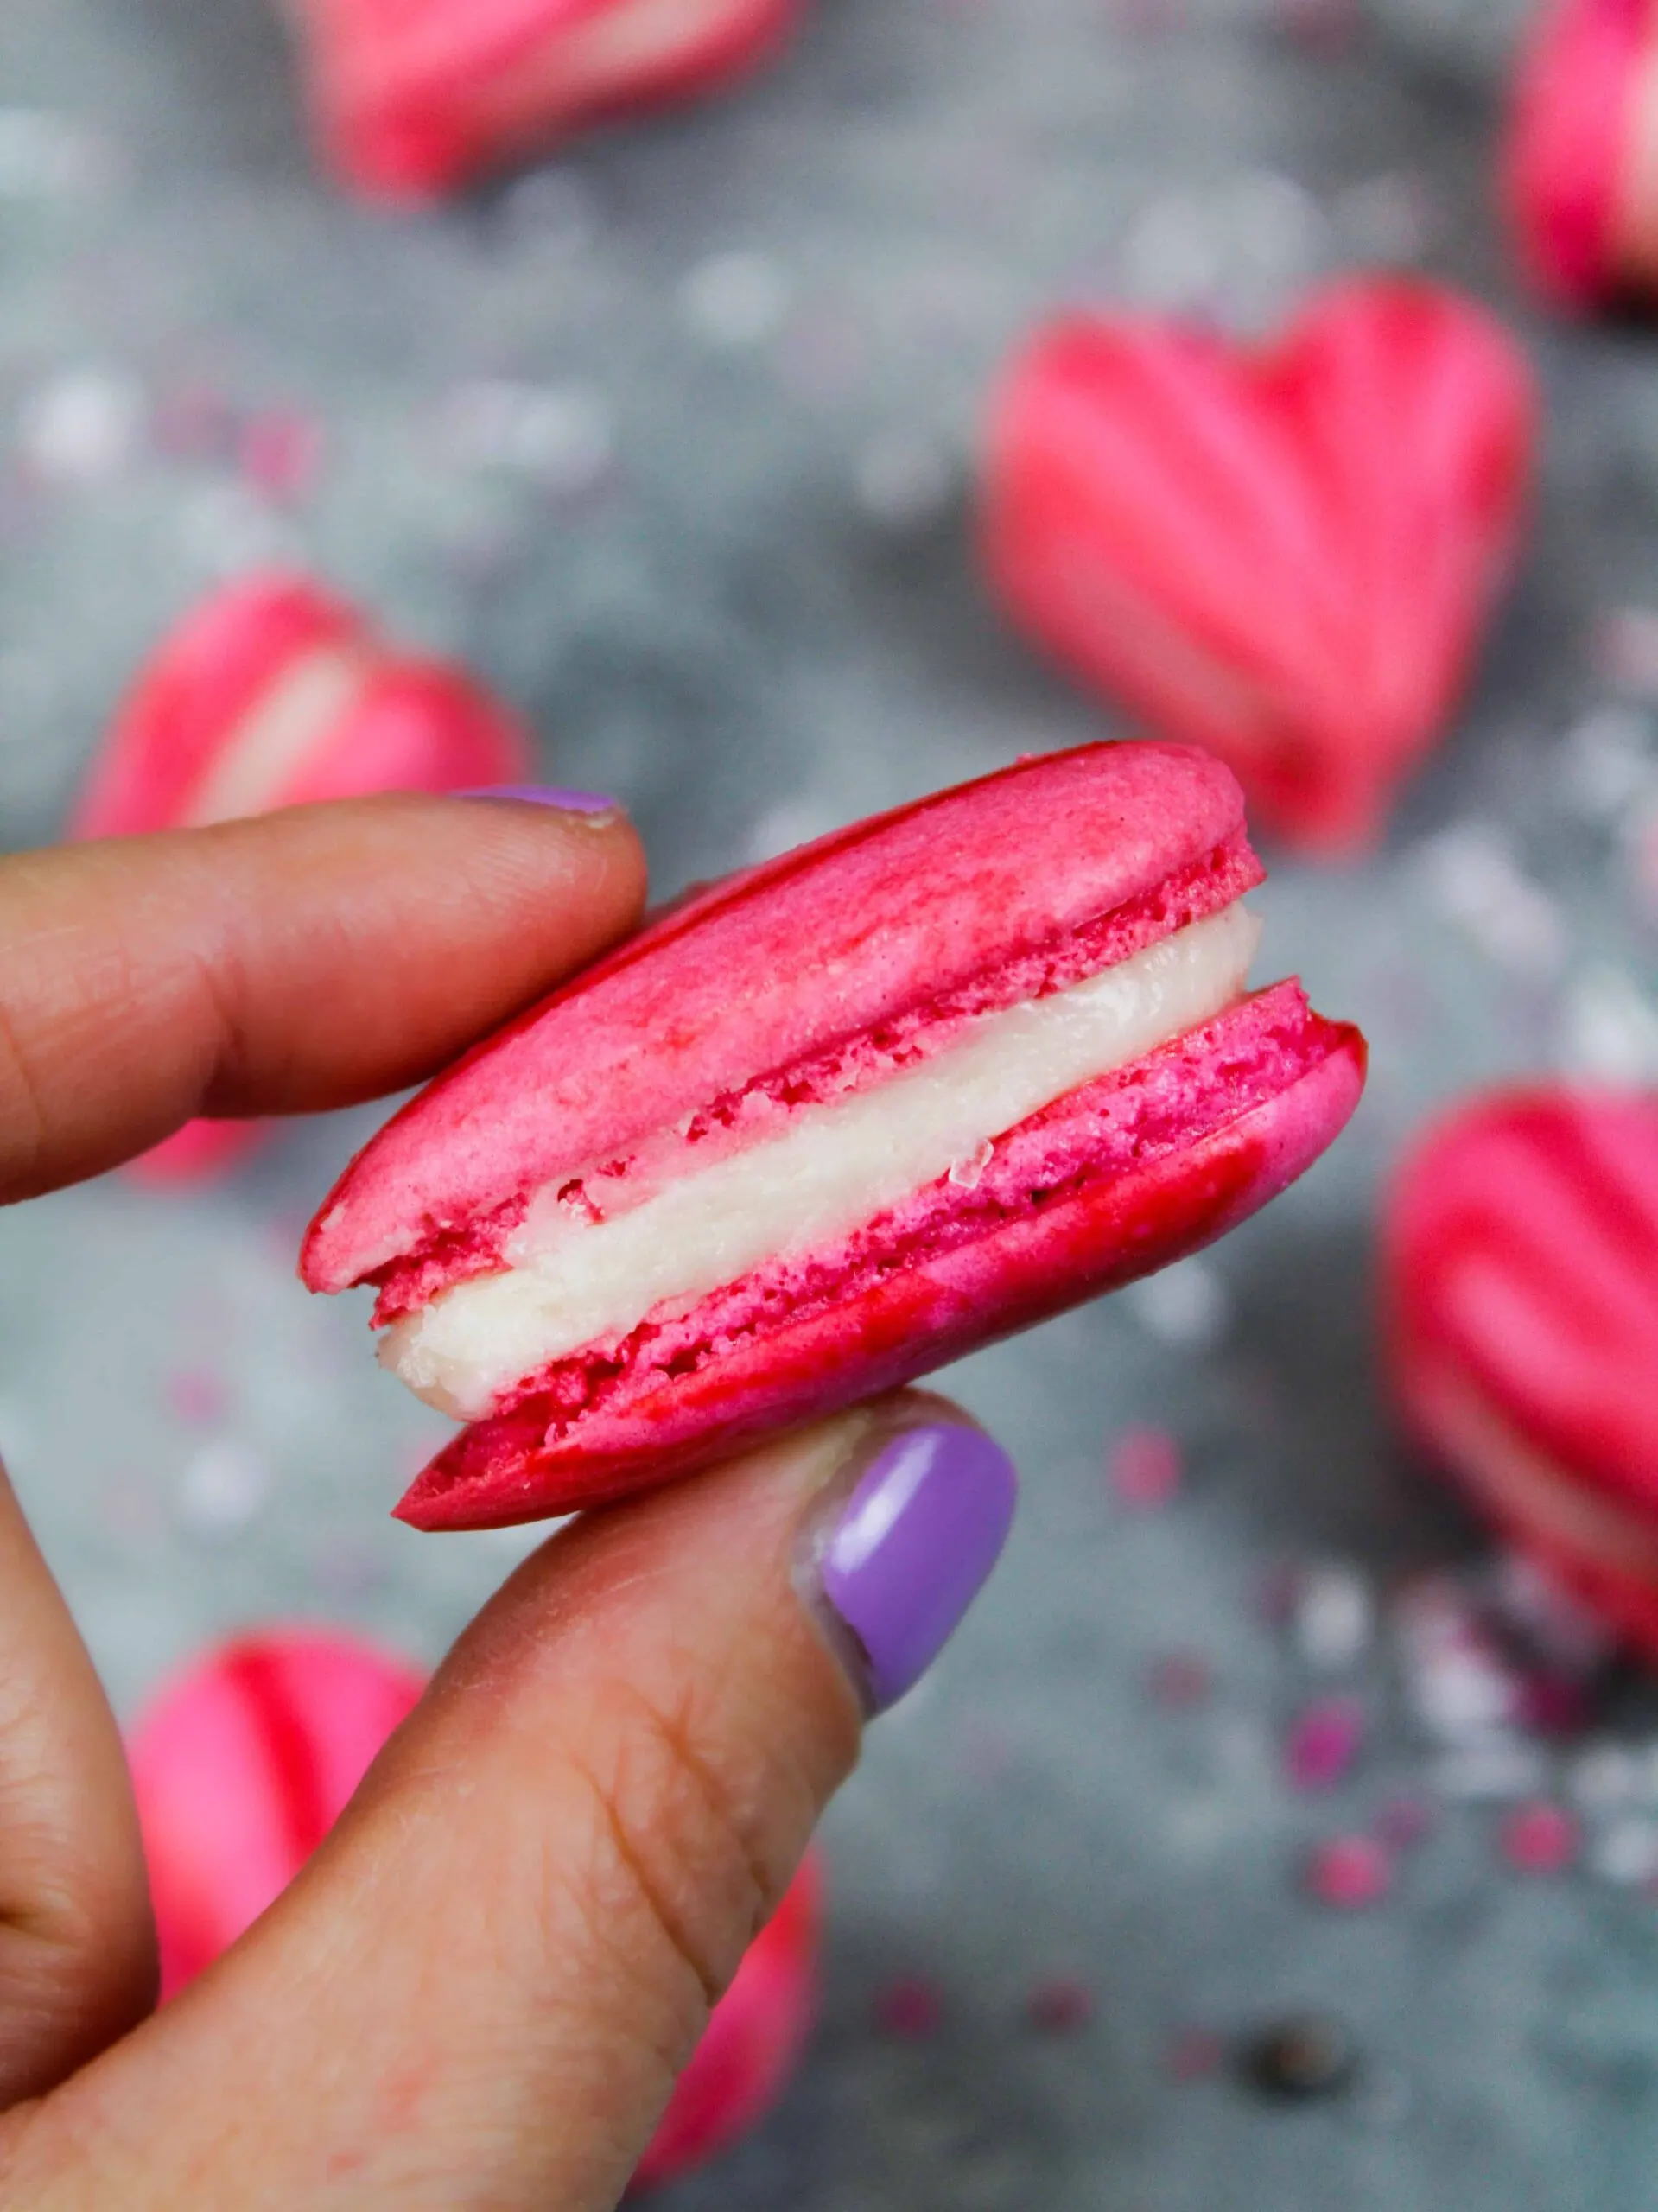 image of the side of a heart shaped macaron showing its buttercream filling and perfect feet